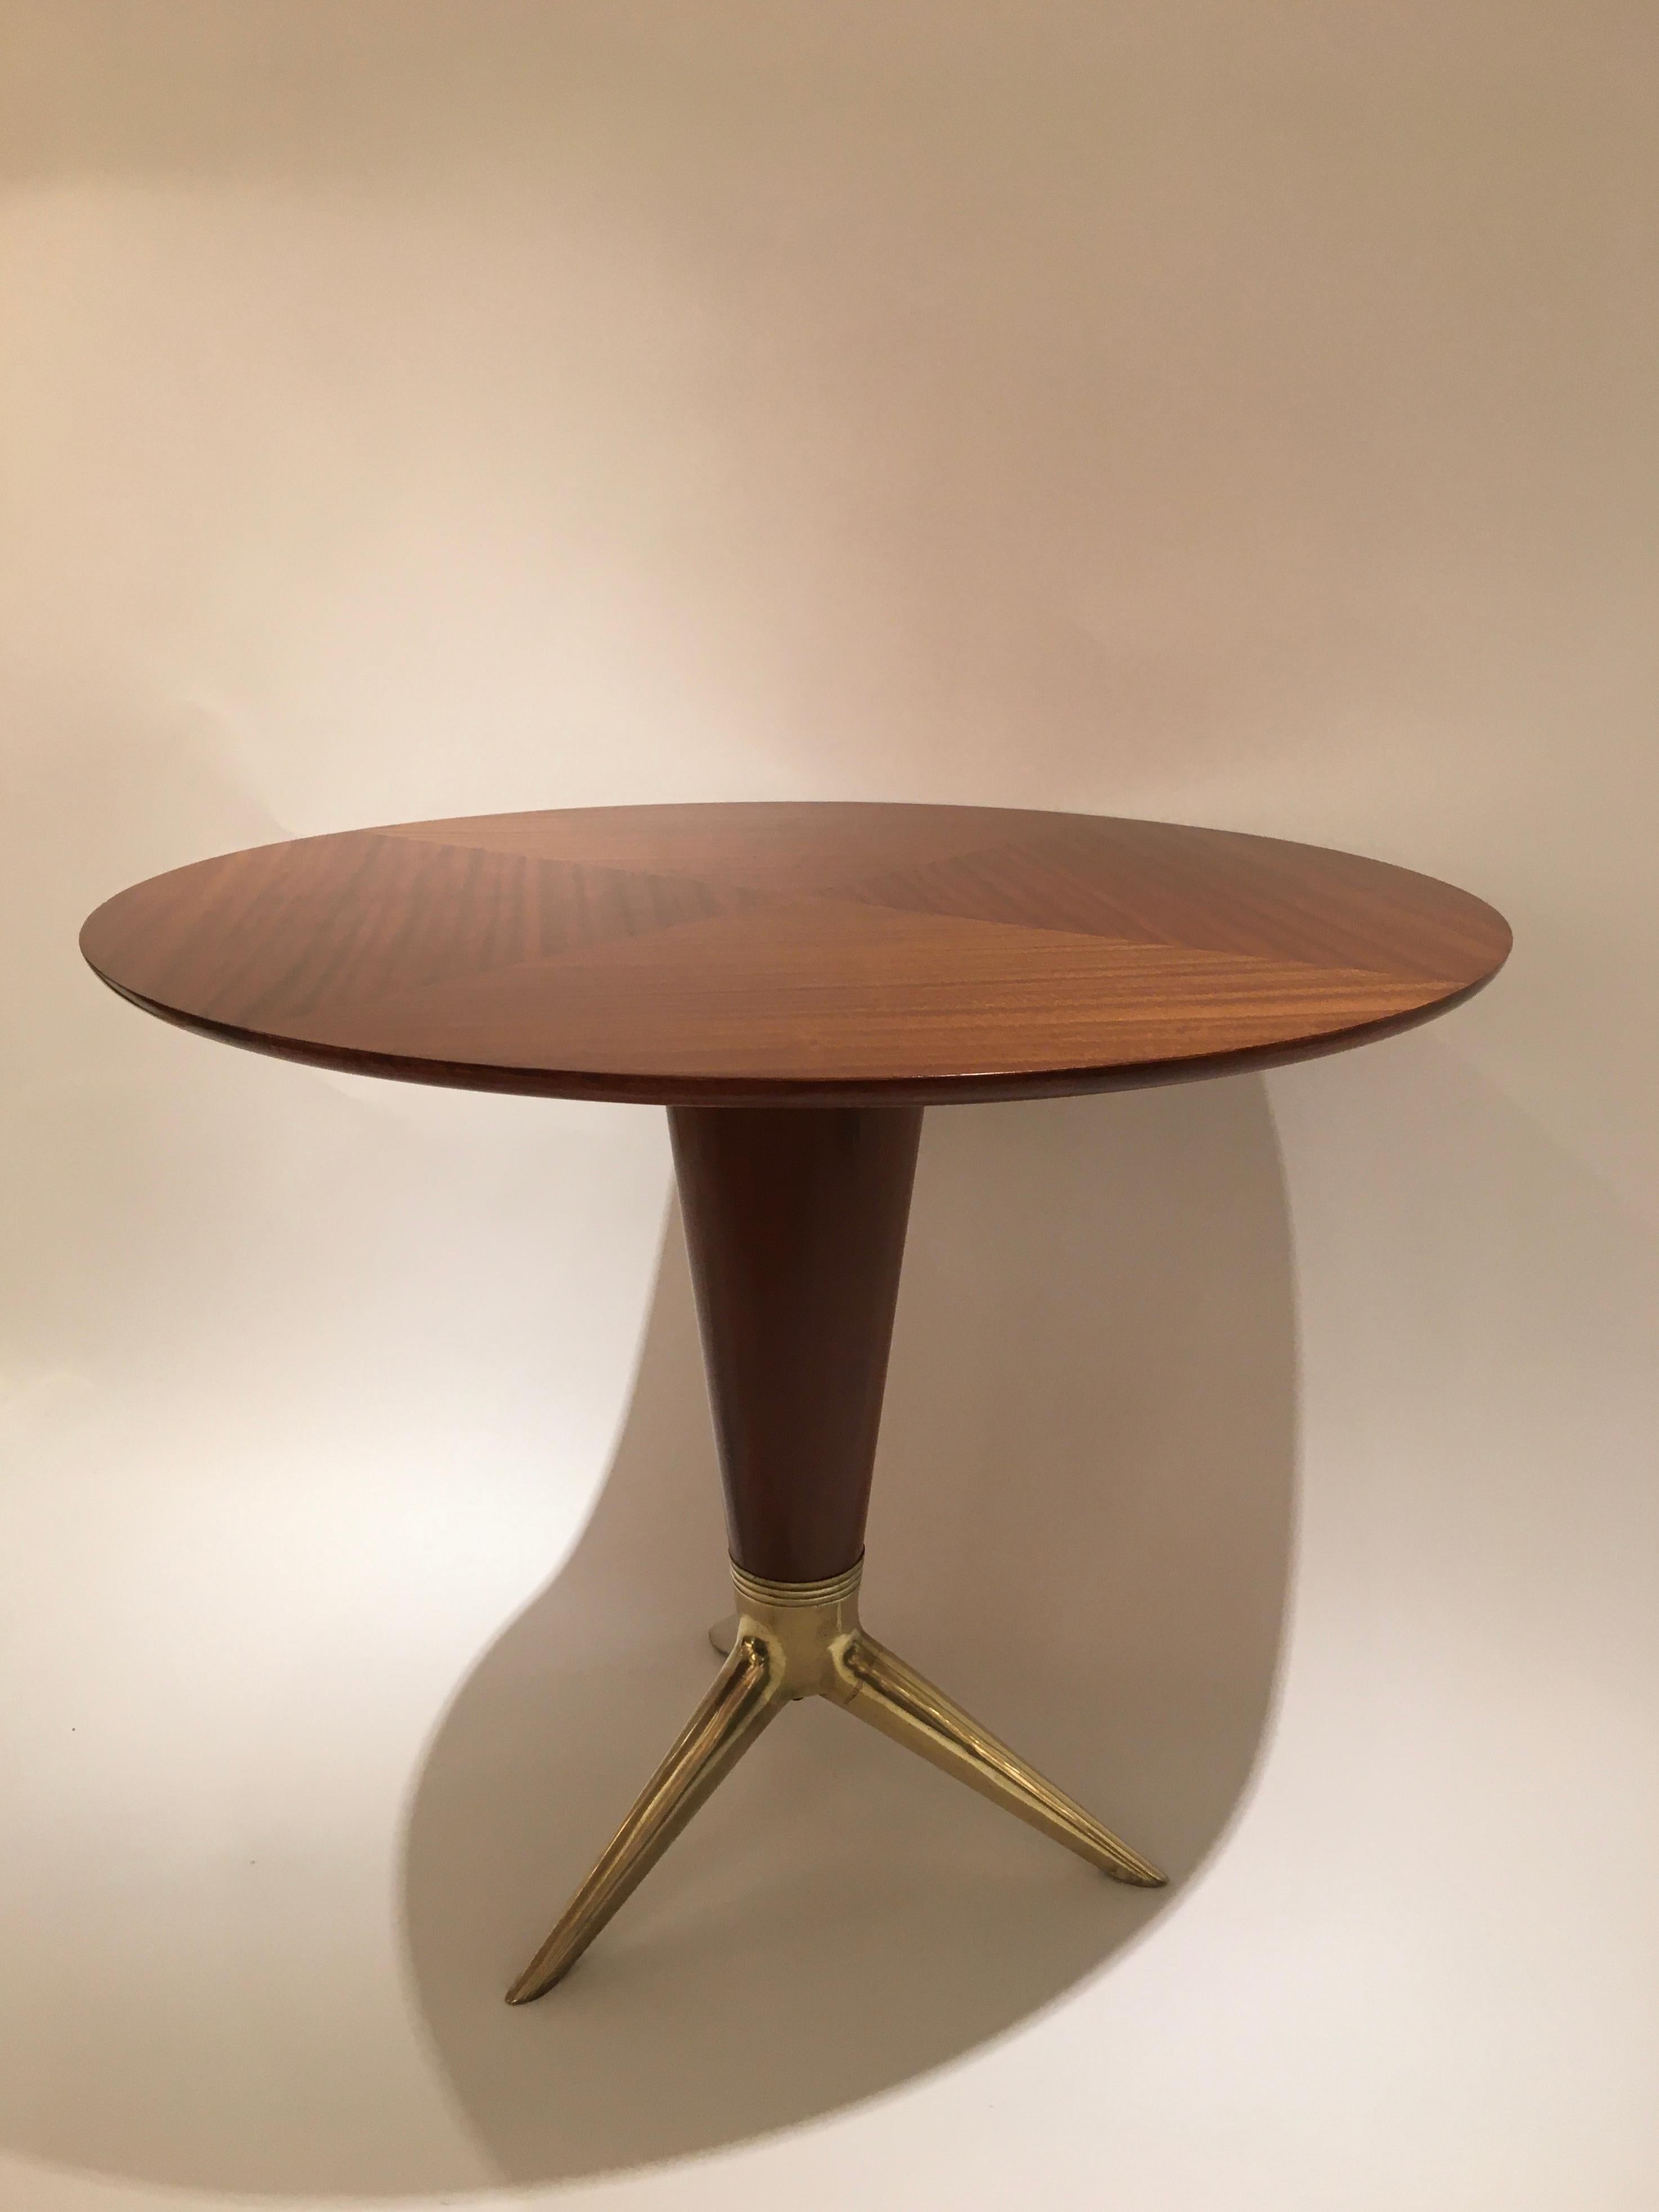 Mid-Century Modern Circular Centre Table in Walnut and Brass by I.S.A. Italy, circa 1950